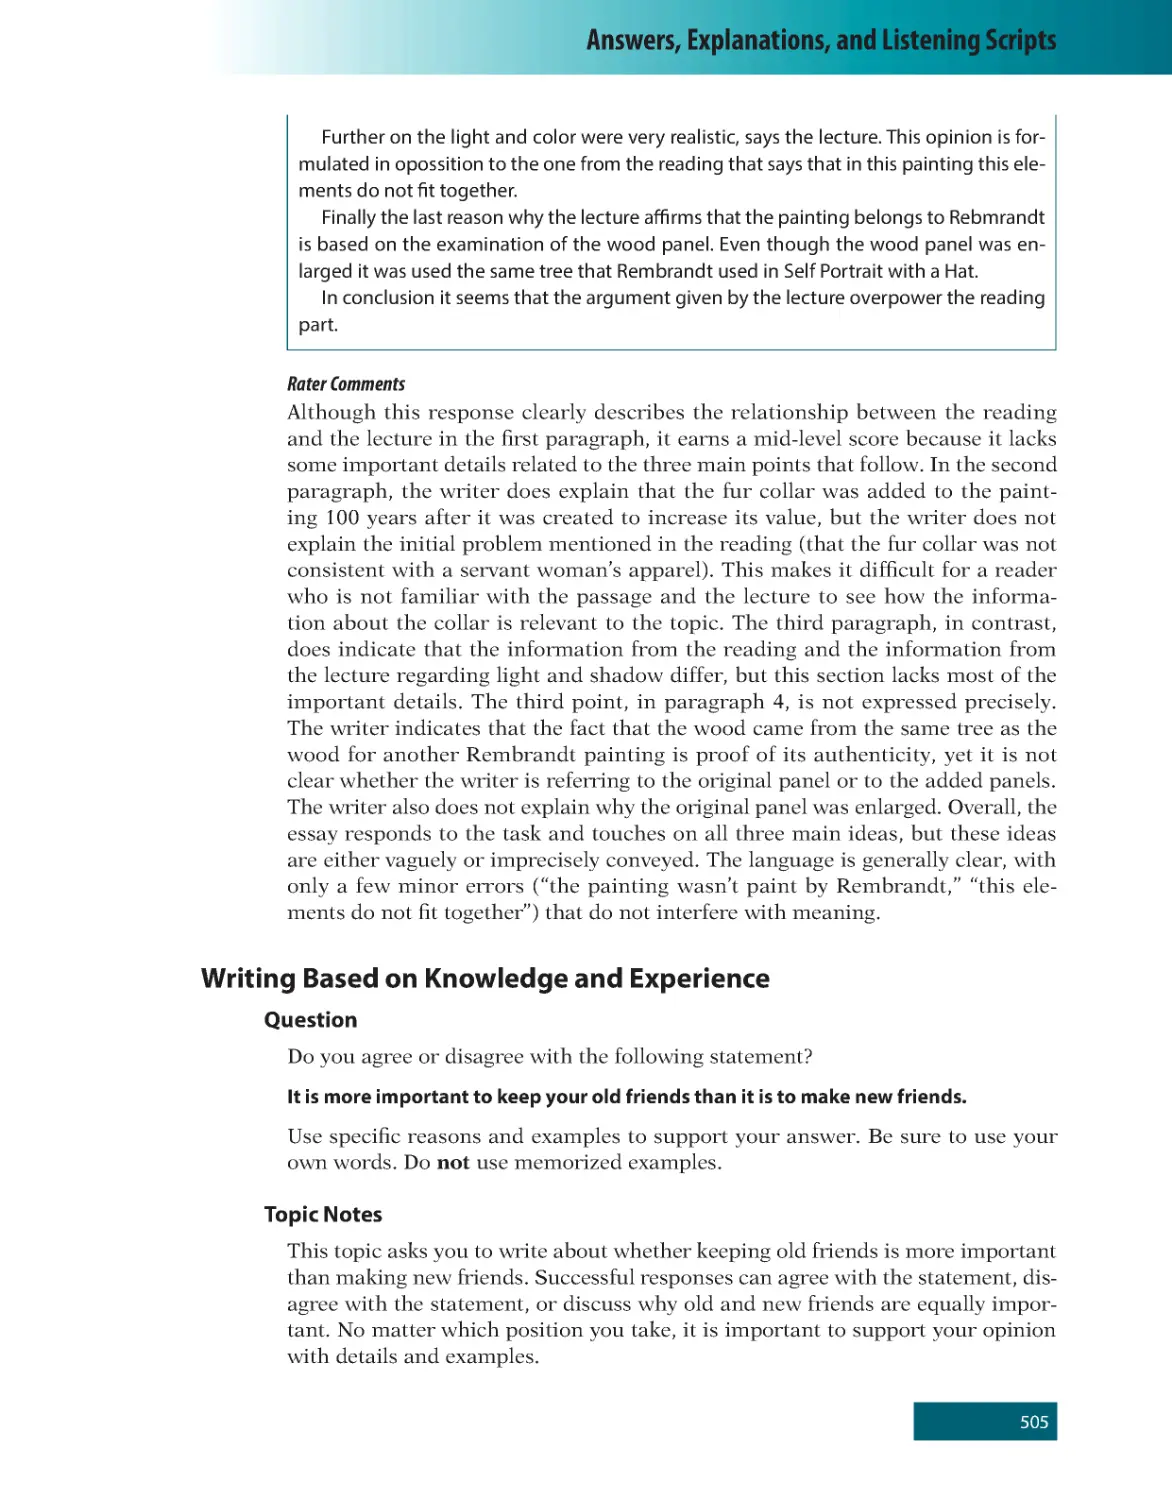 Rater Comments
Writing Based on Knowledge and Experience
Topic Notes